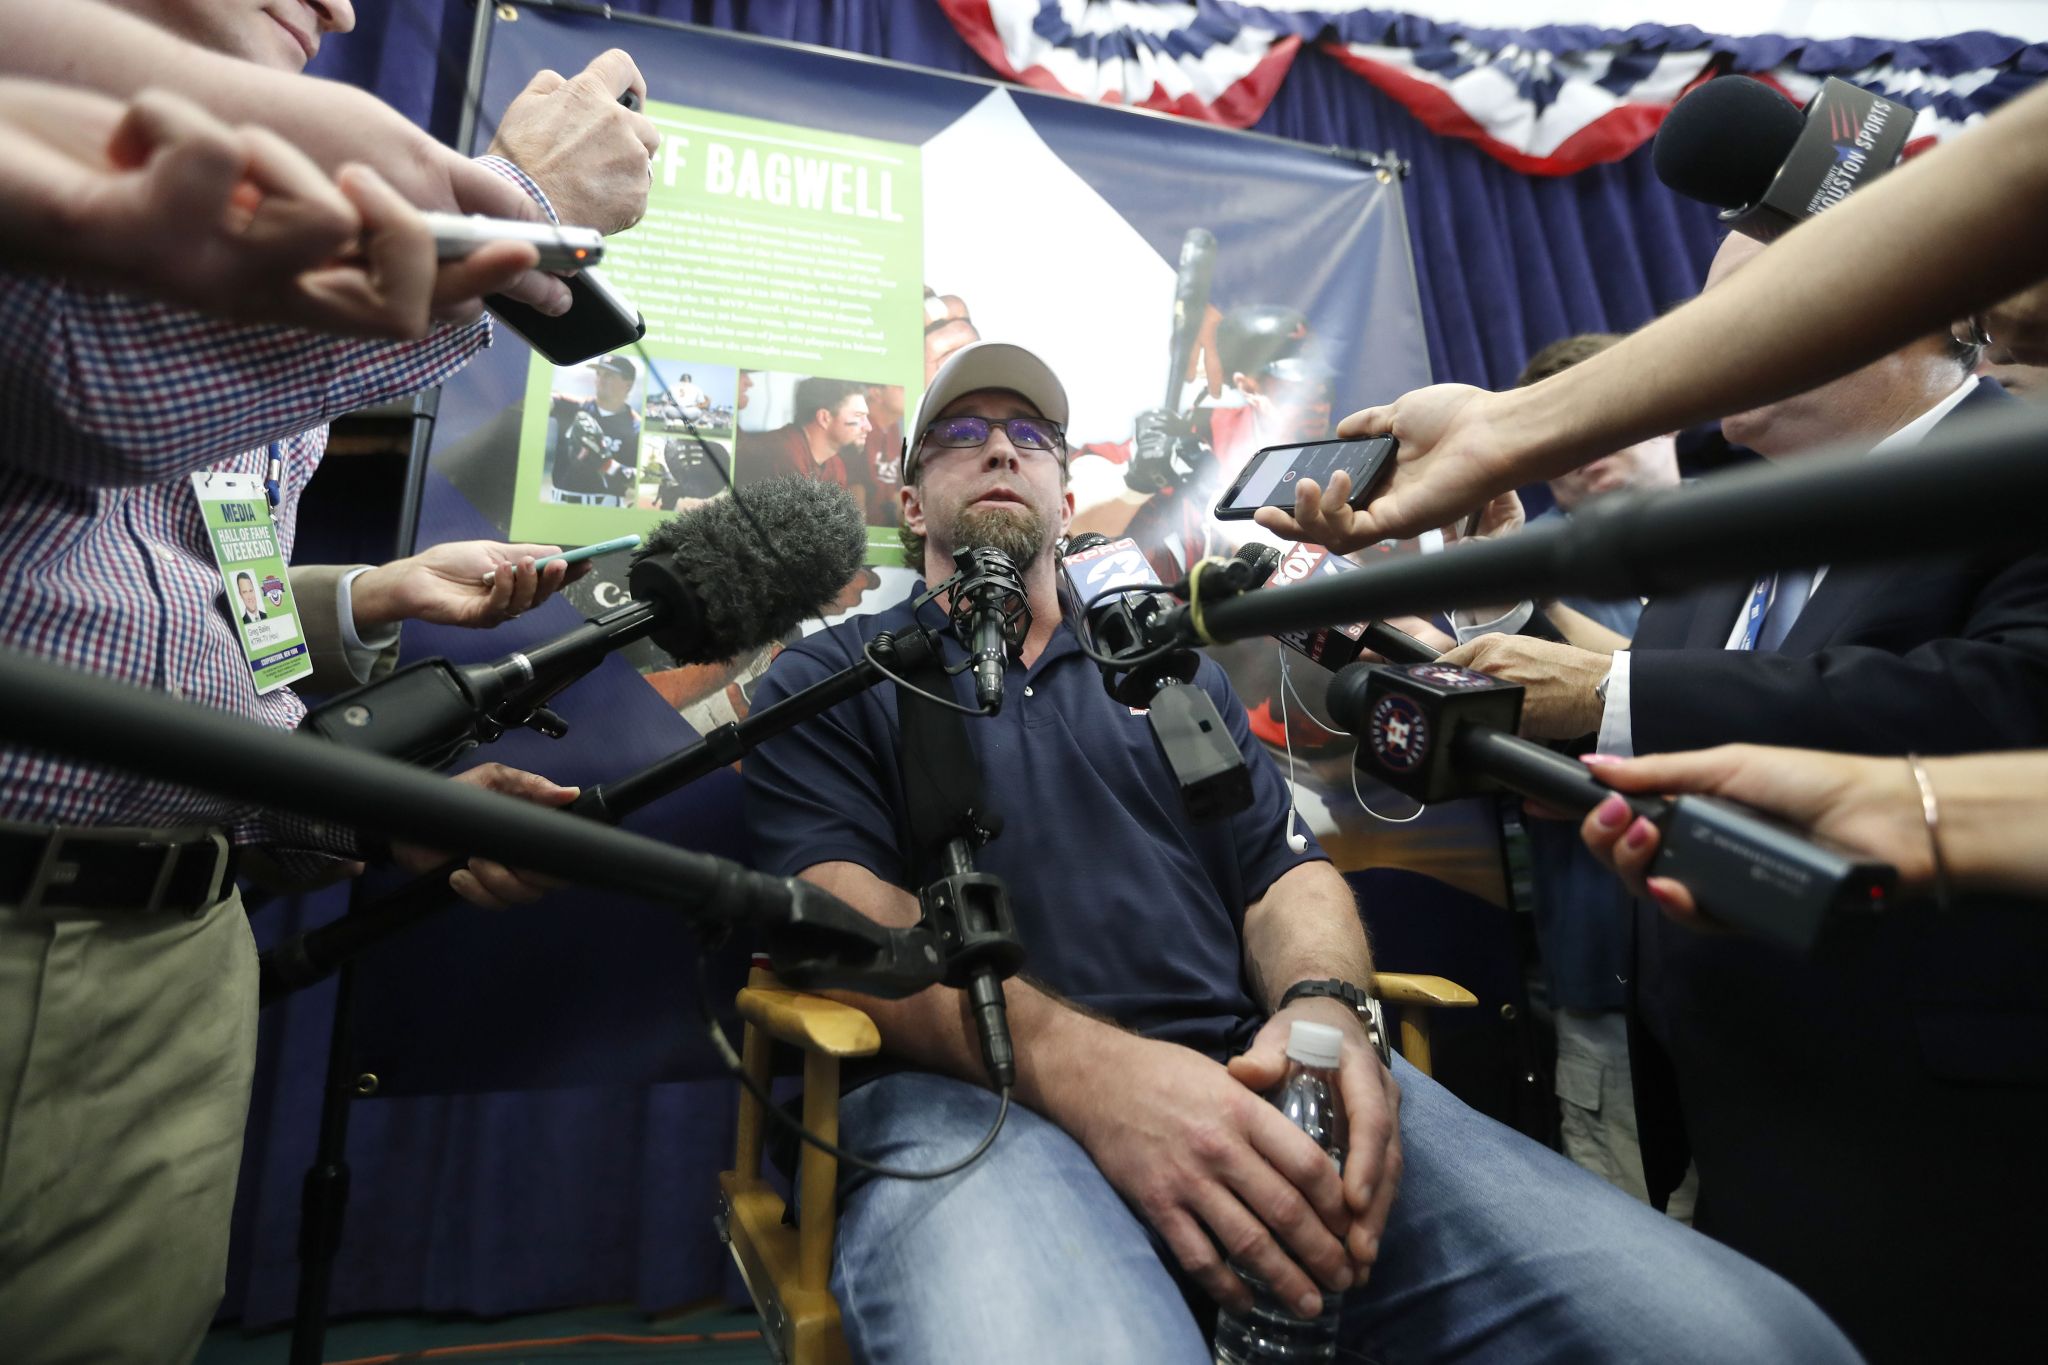 Generations of Astros fans follow Jeff Bagwell to Cooperstown